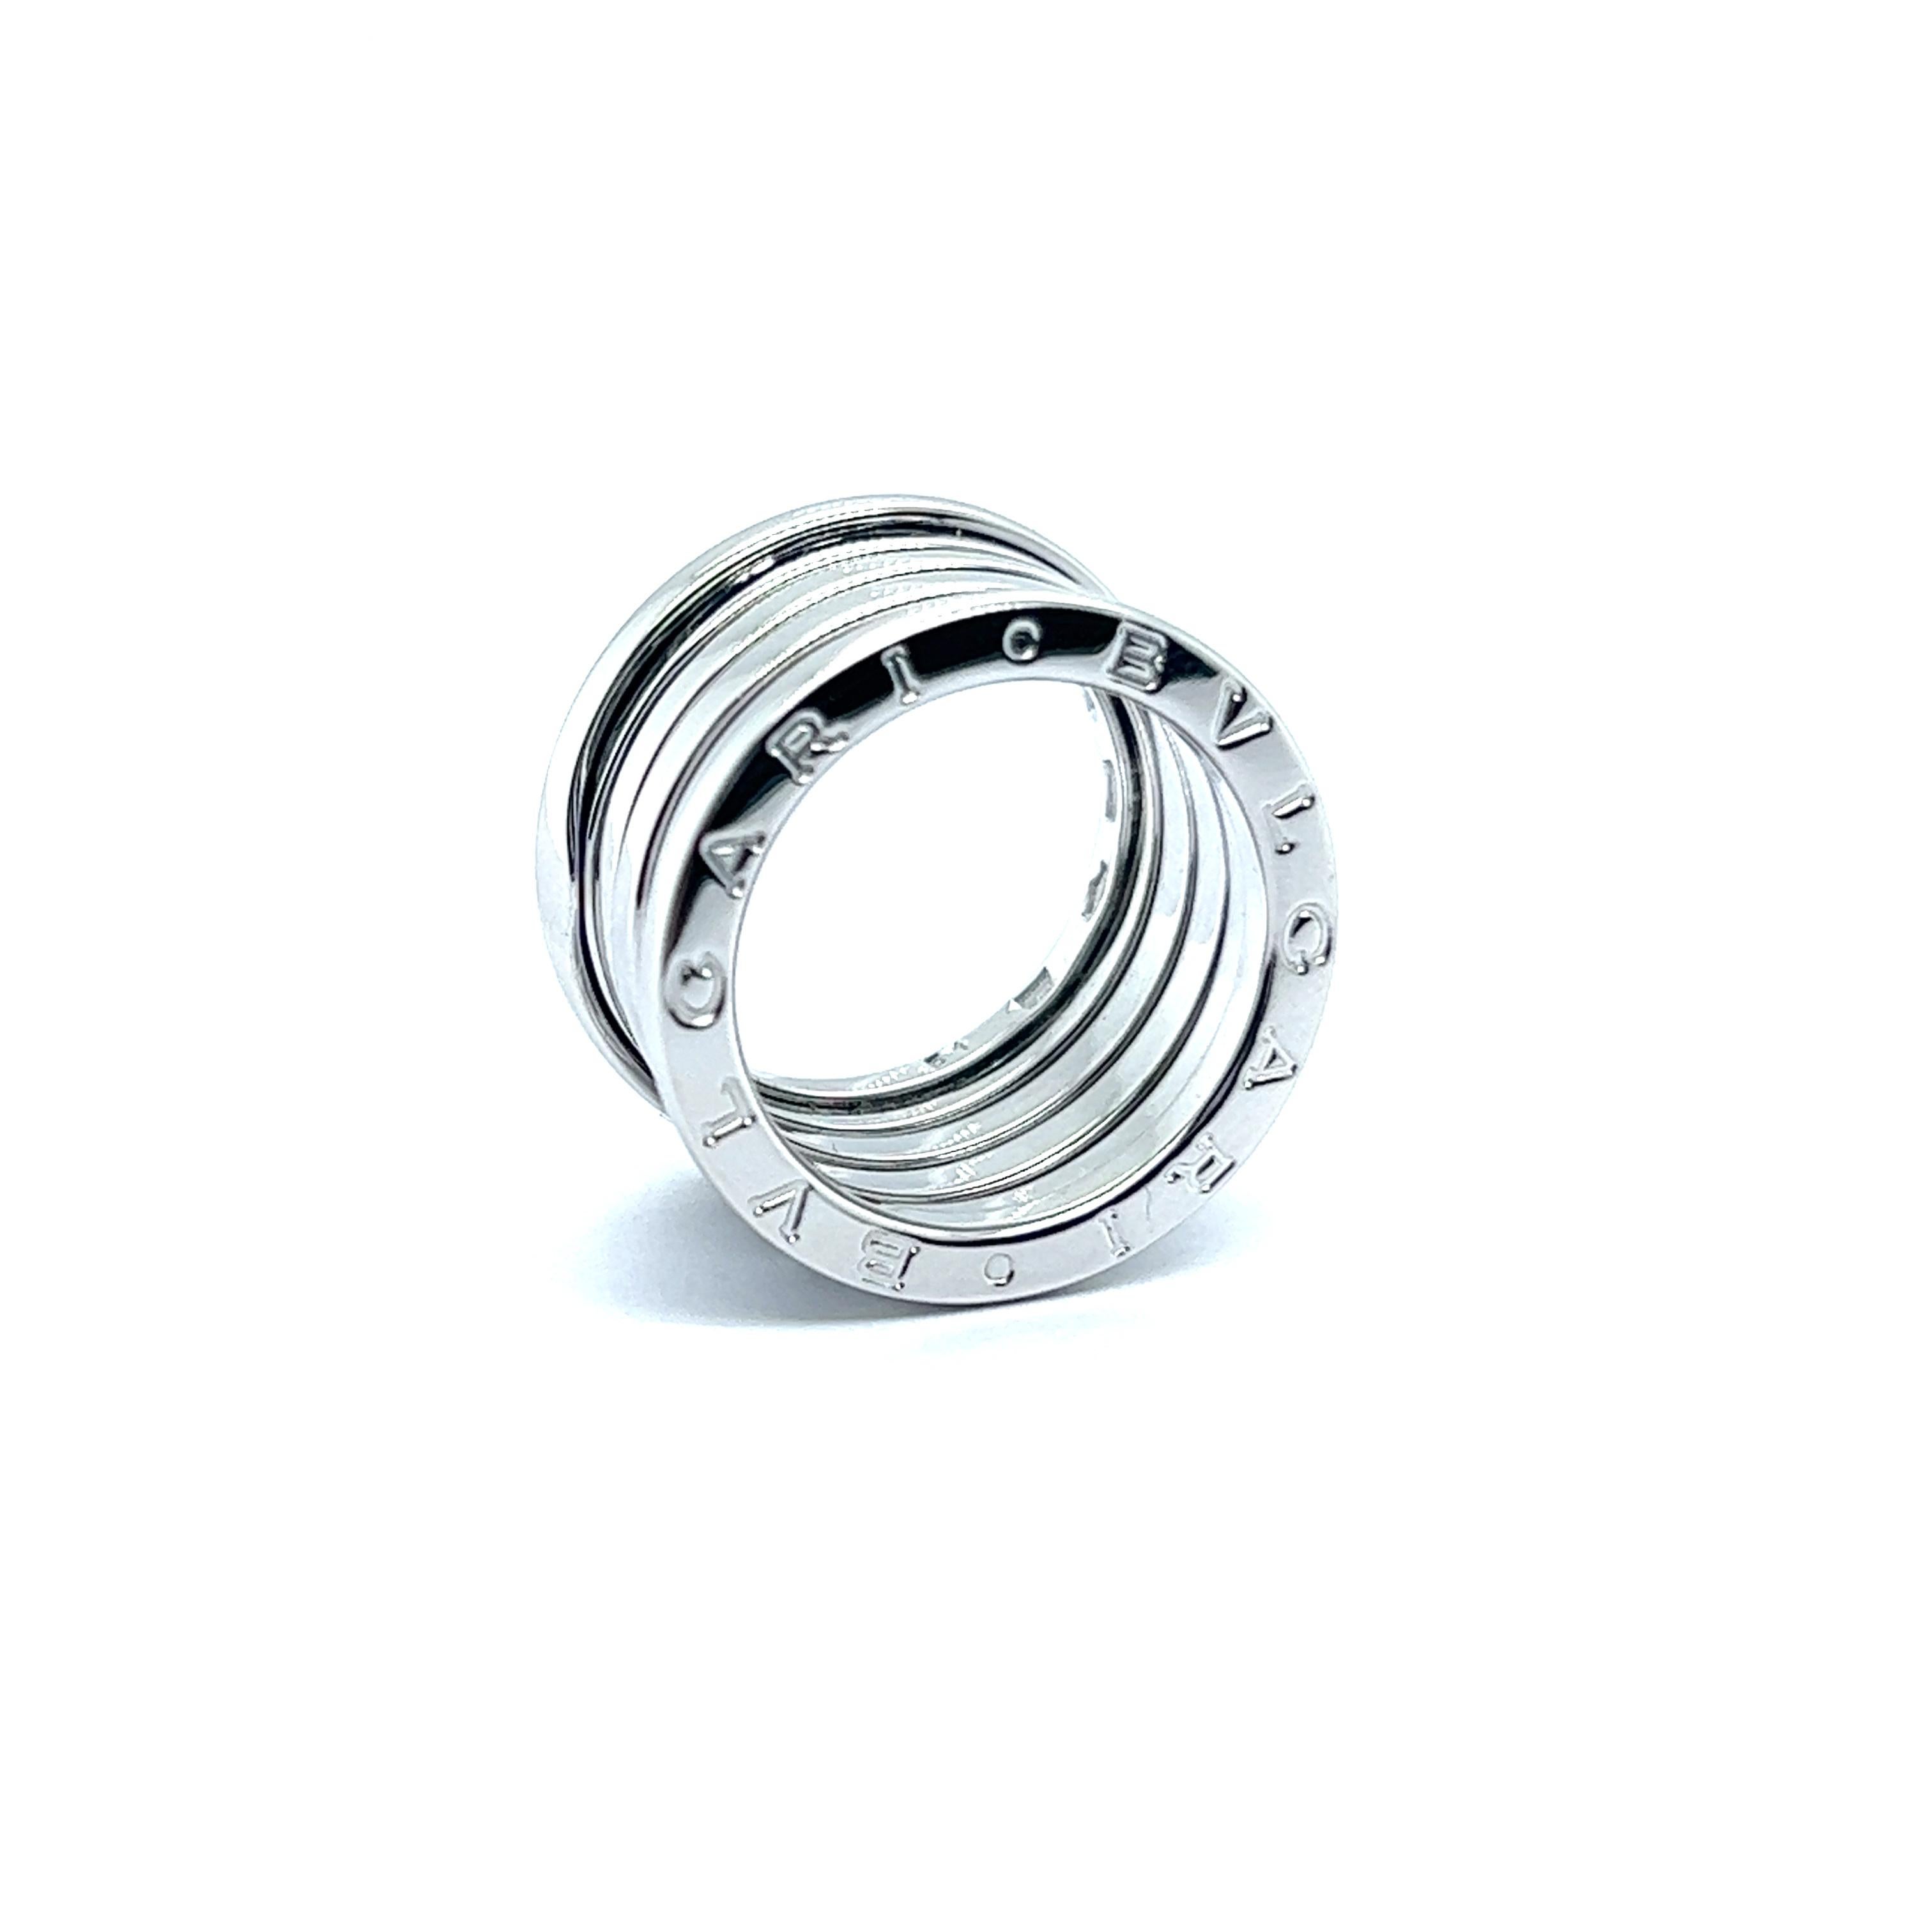 Bulgari B Zero 1 Ring in 18k White Gold In Excellent Condition For Sale In Lucerne, CH